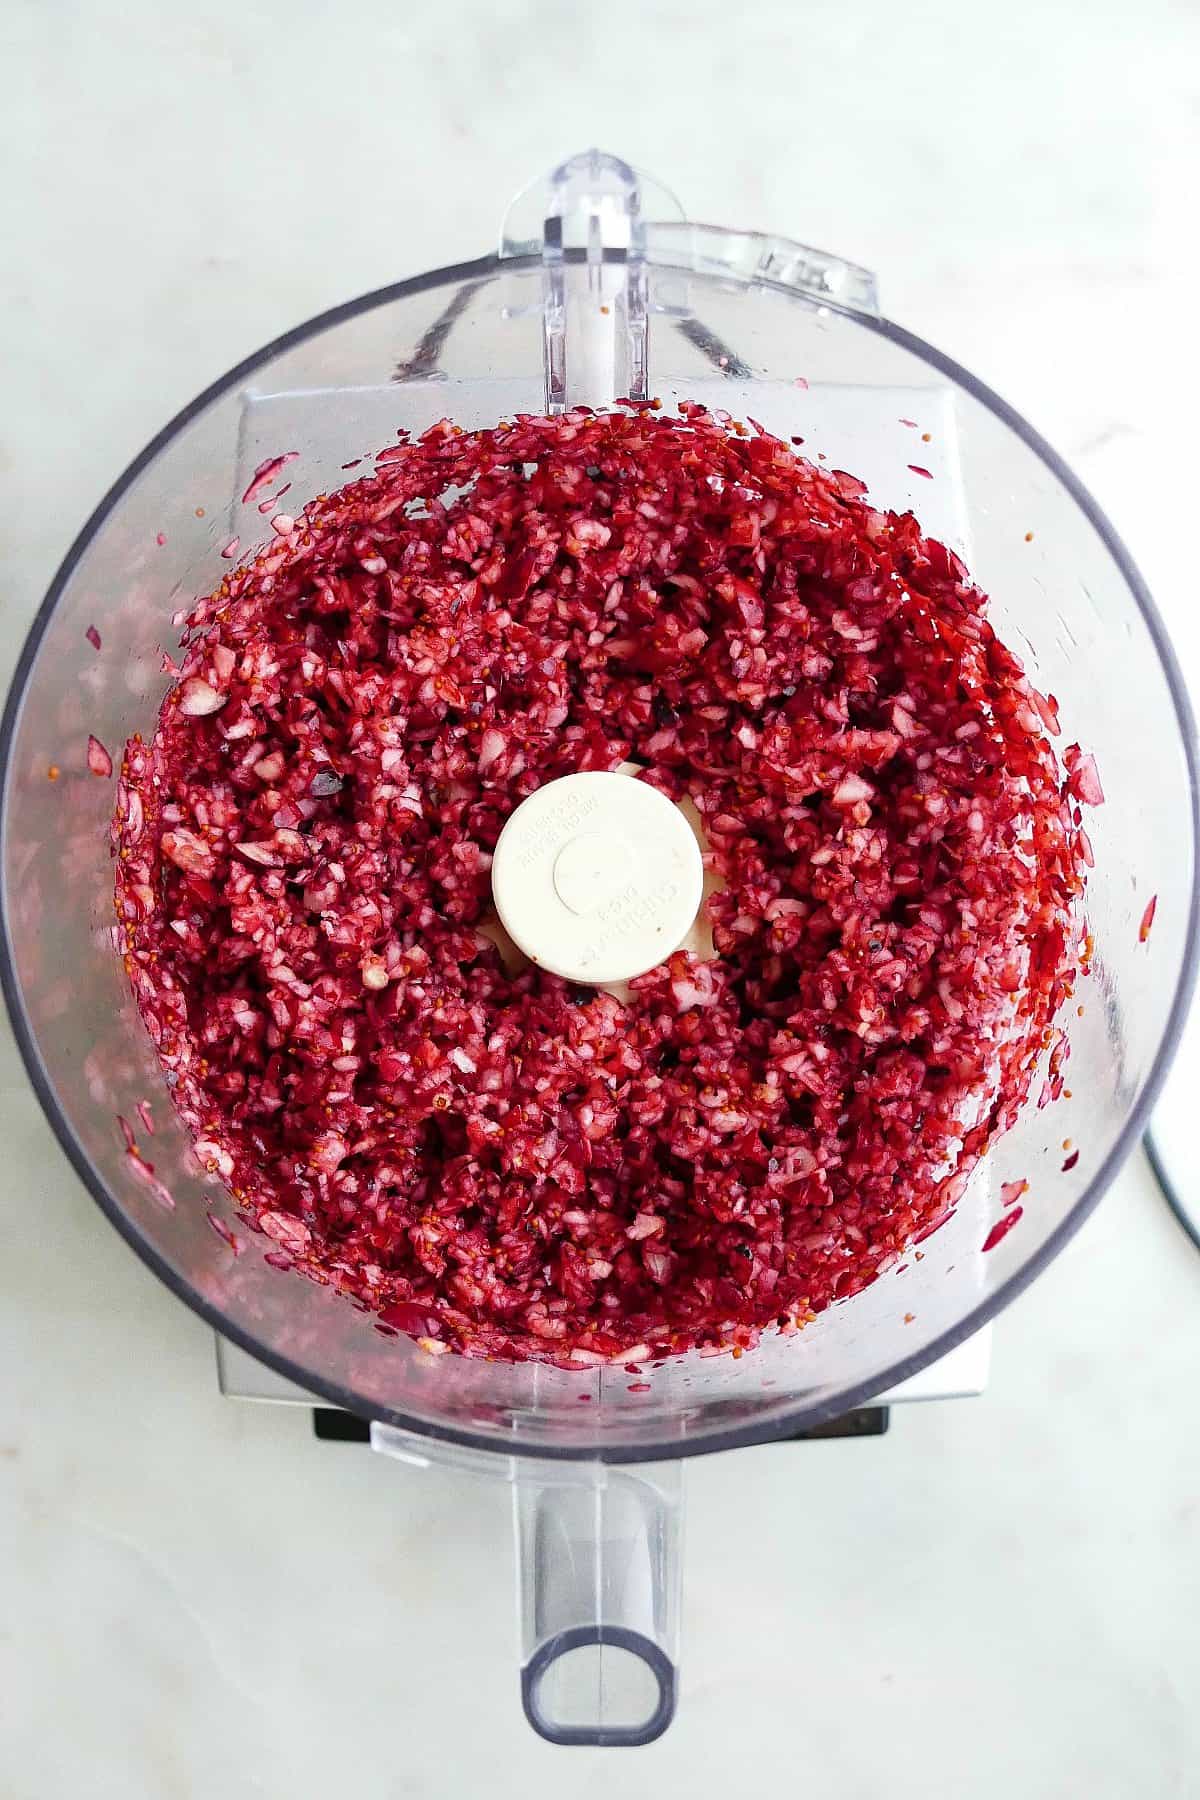 chopped cranberries in a food processor on a counter